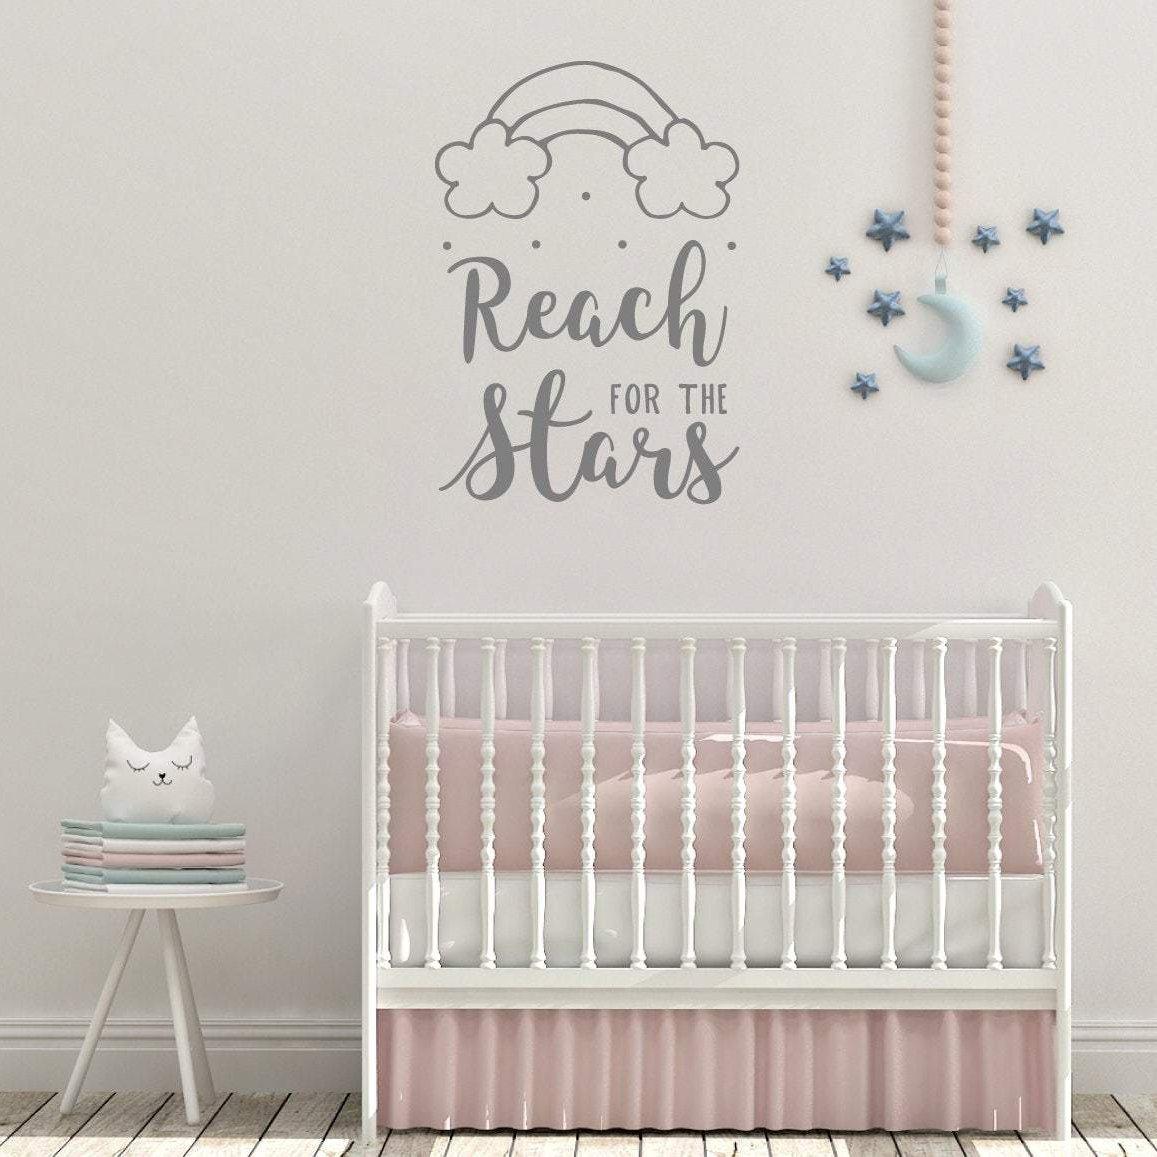 Reach For The Stars Nursery Wall Sticker Quote